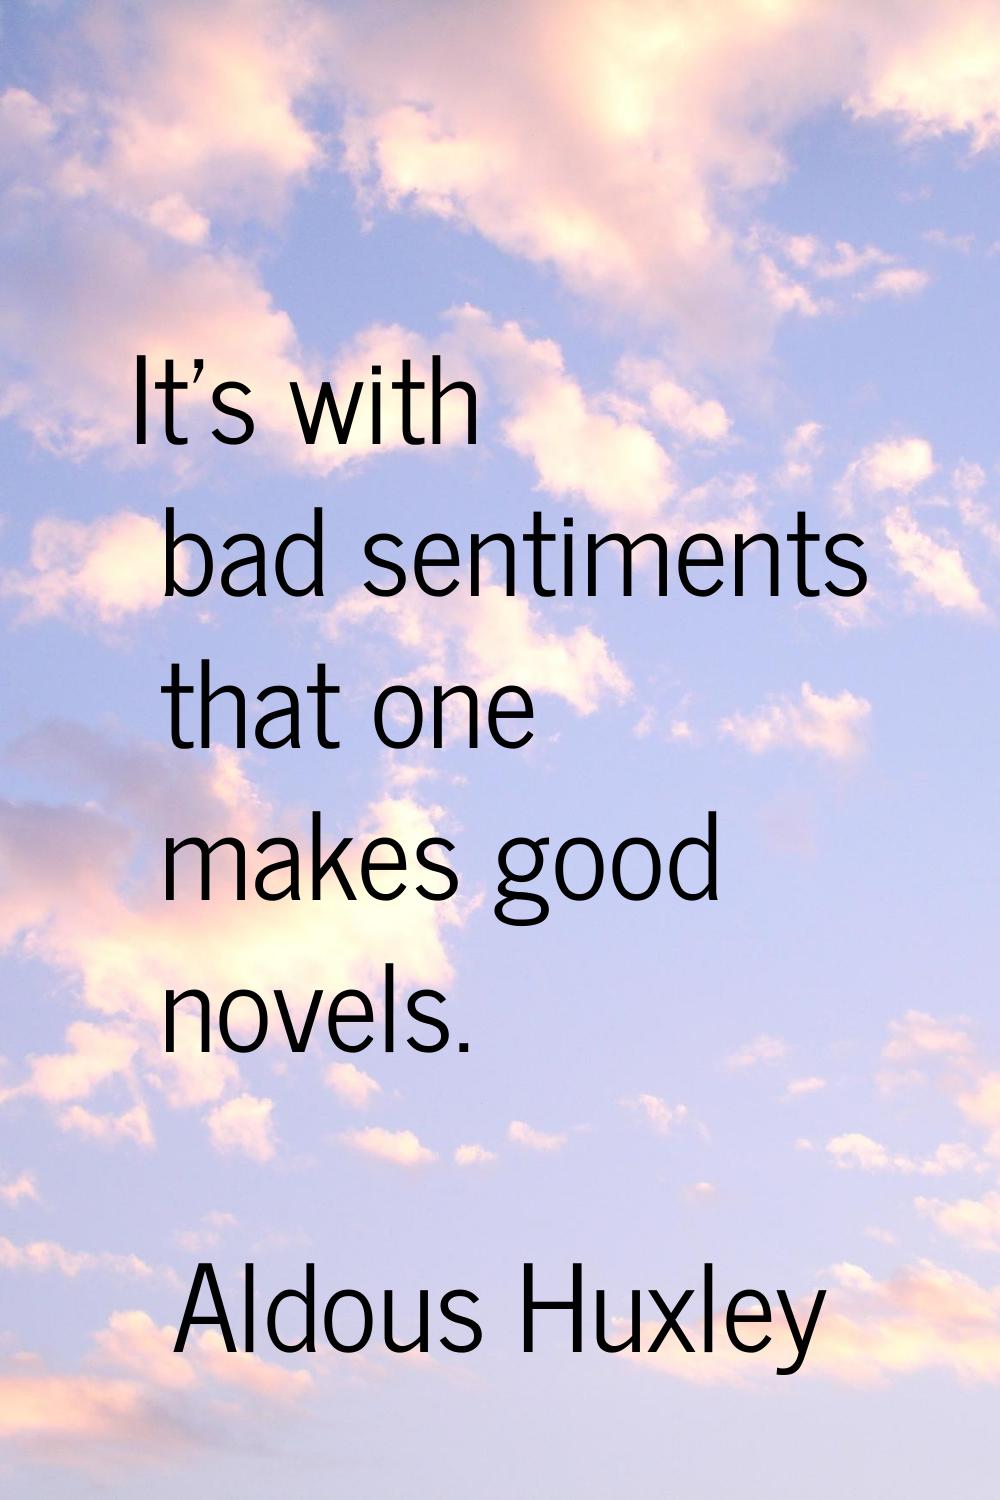 It's with bad sentiments that one makes good novels.